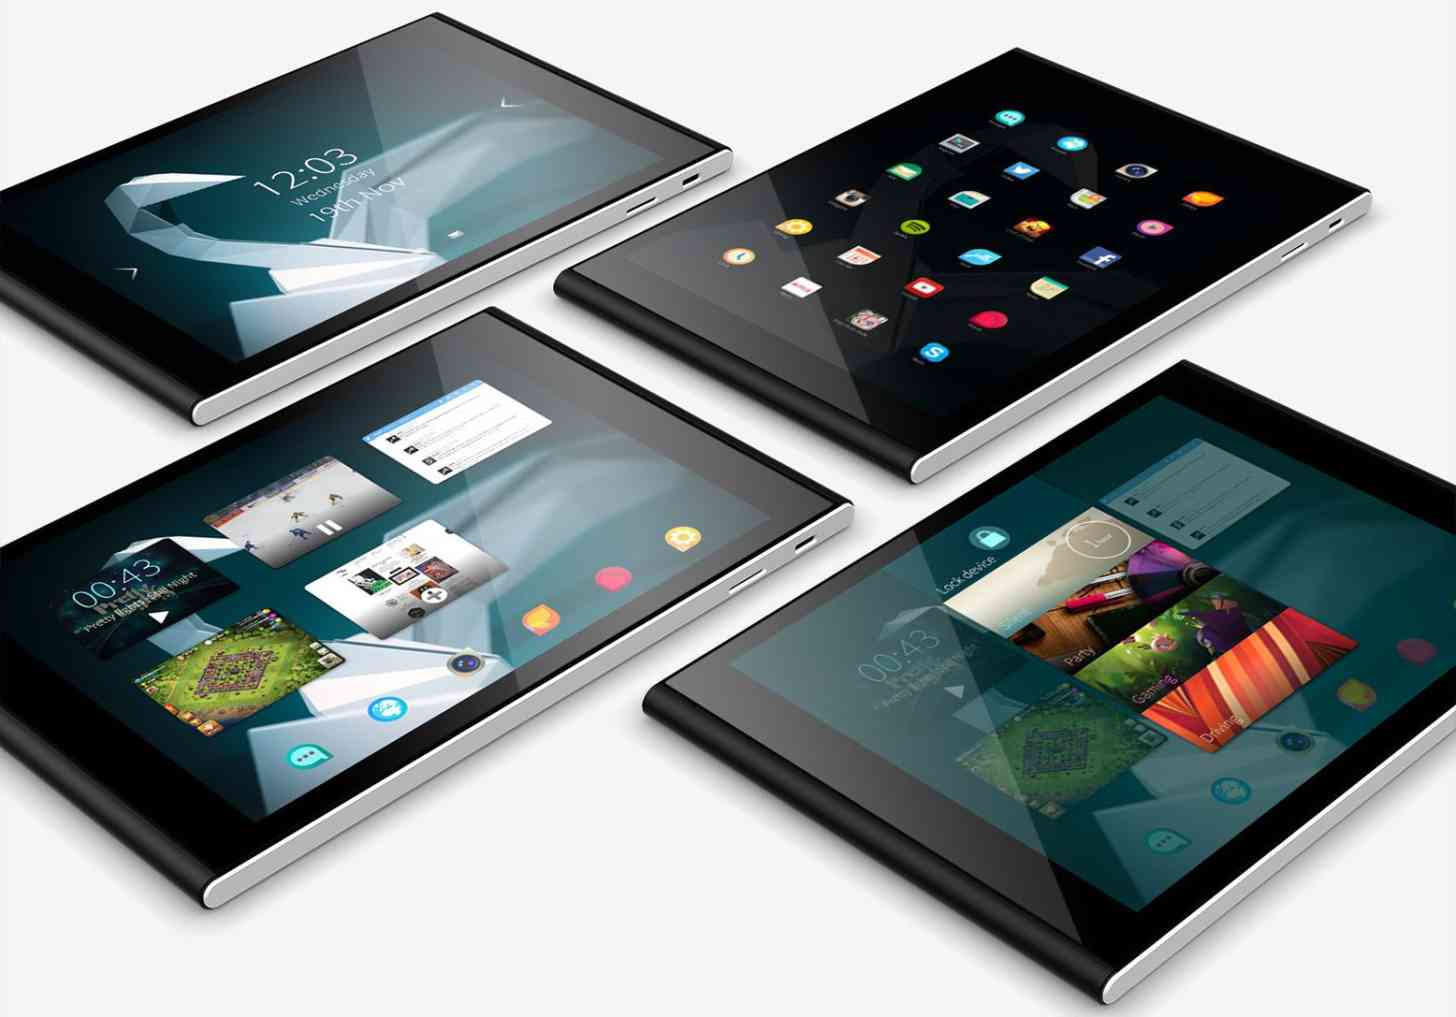 Jolla Tablet group